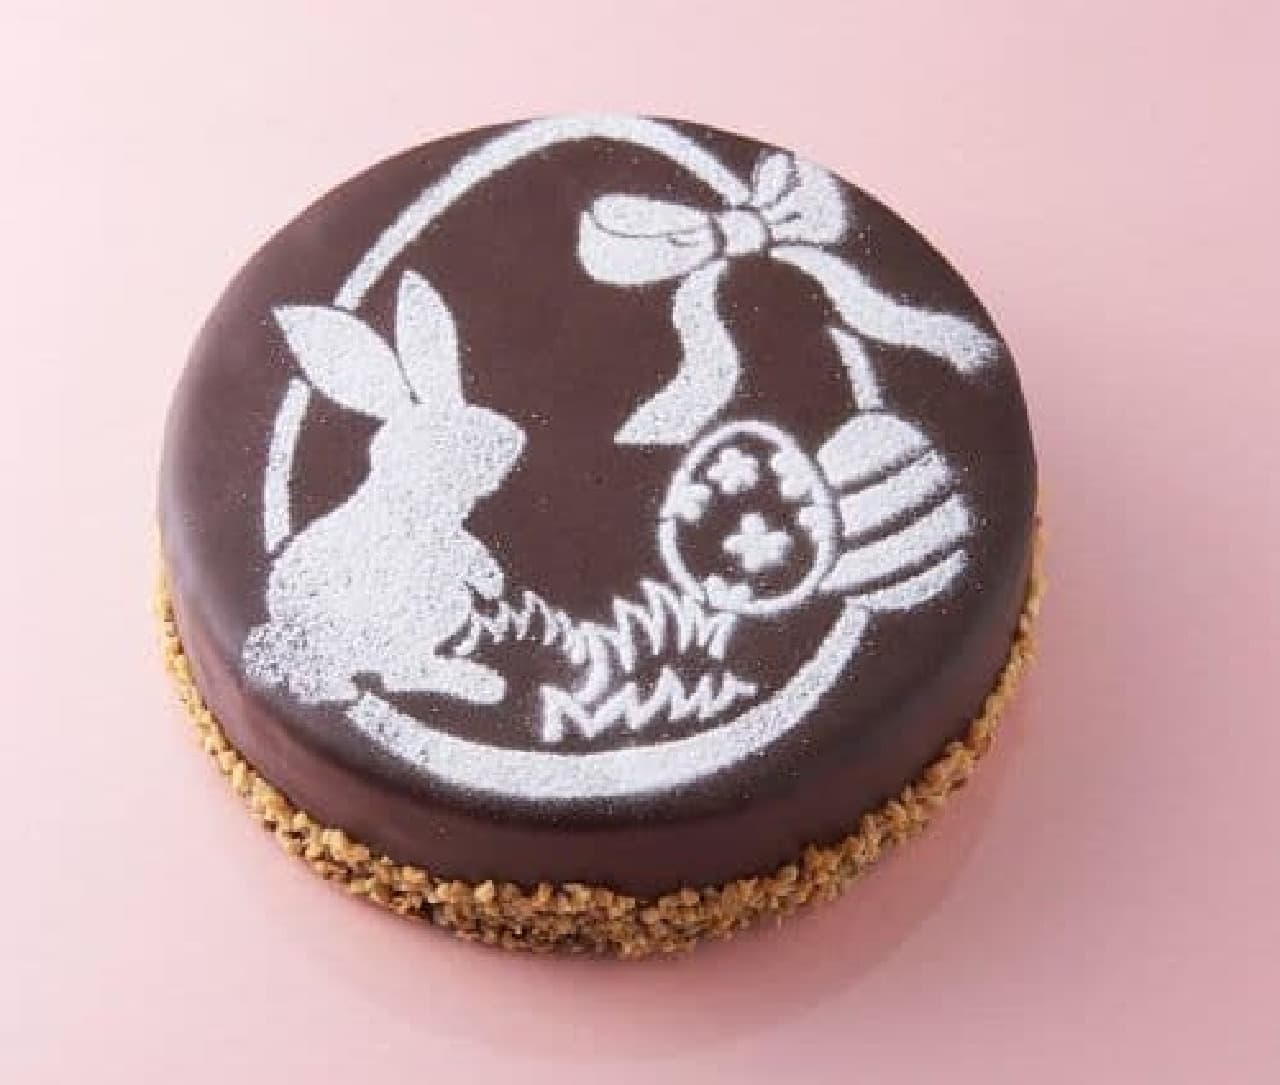 Chateraise "Easter Sweets"